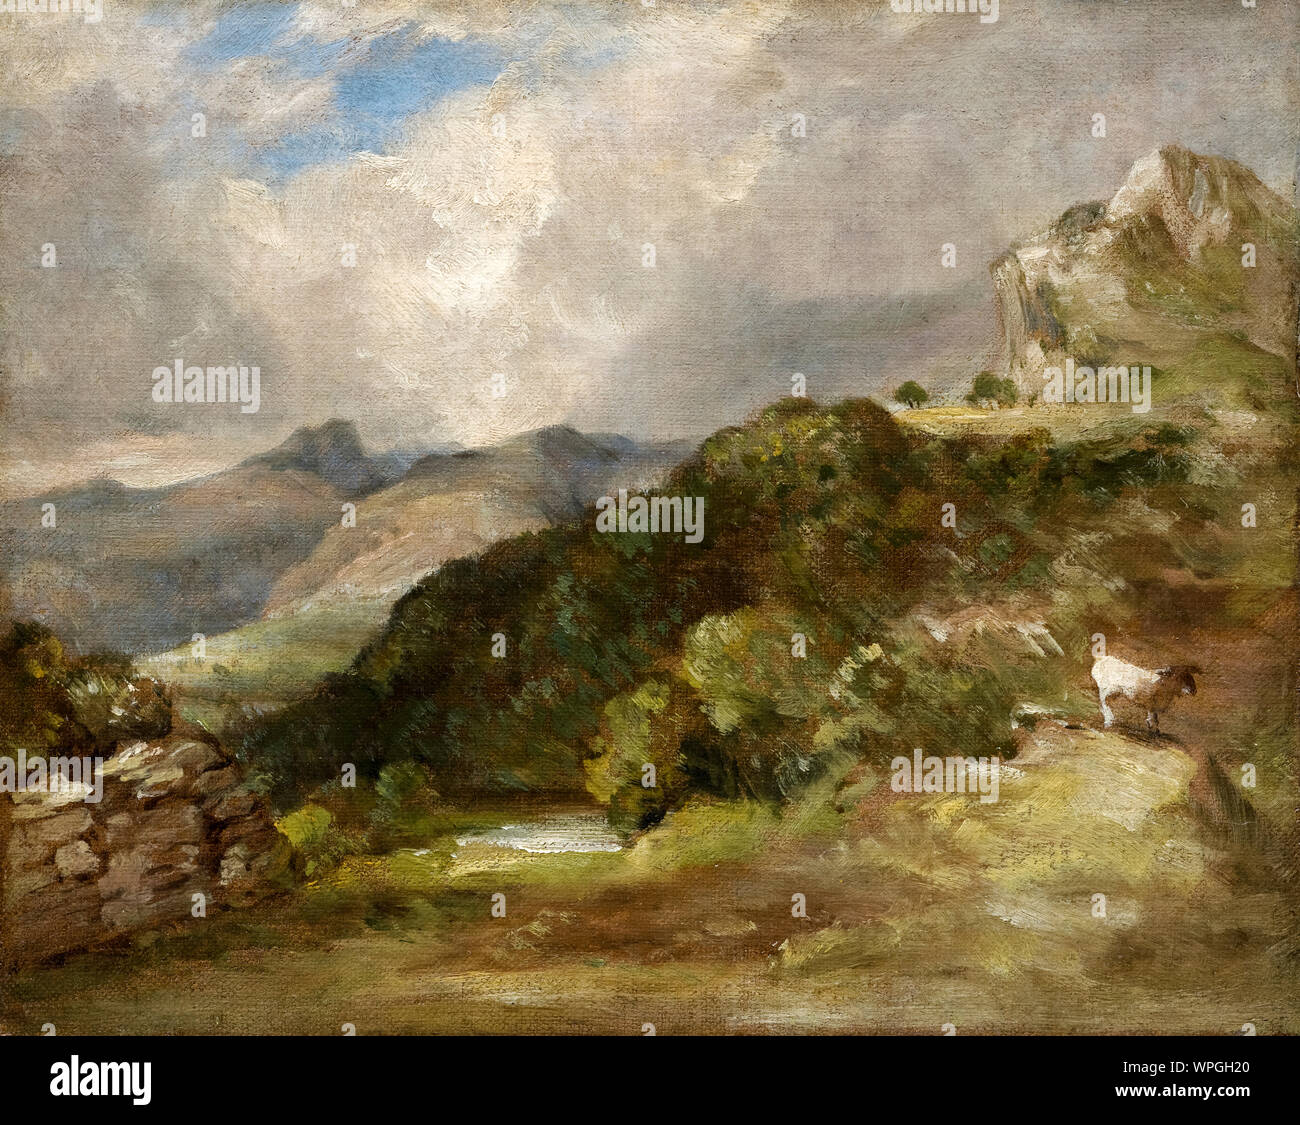 John Constable, Bow Fell, Cumberland, landscape painting, 1807 Stock Photo